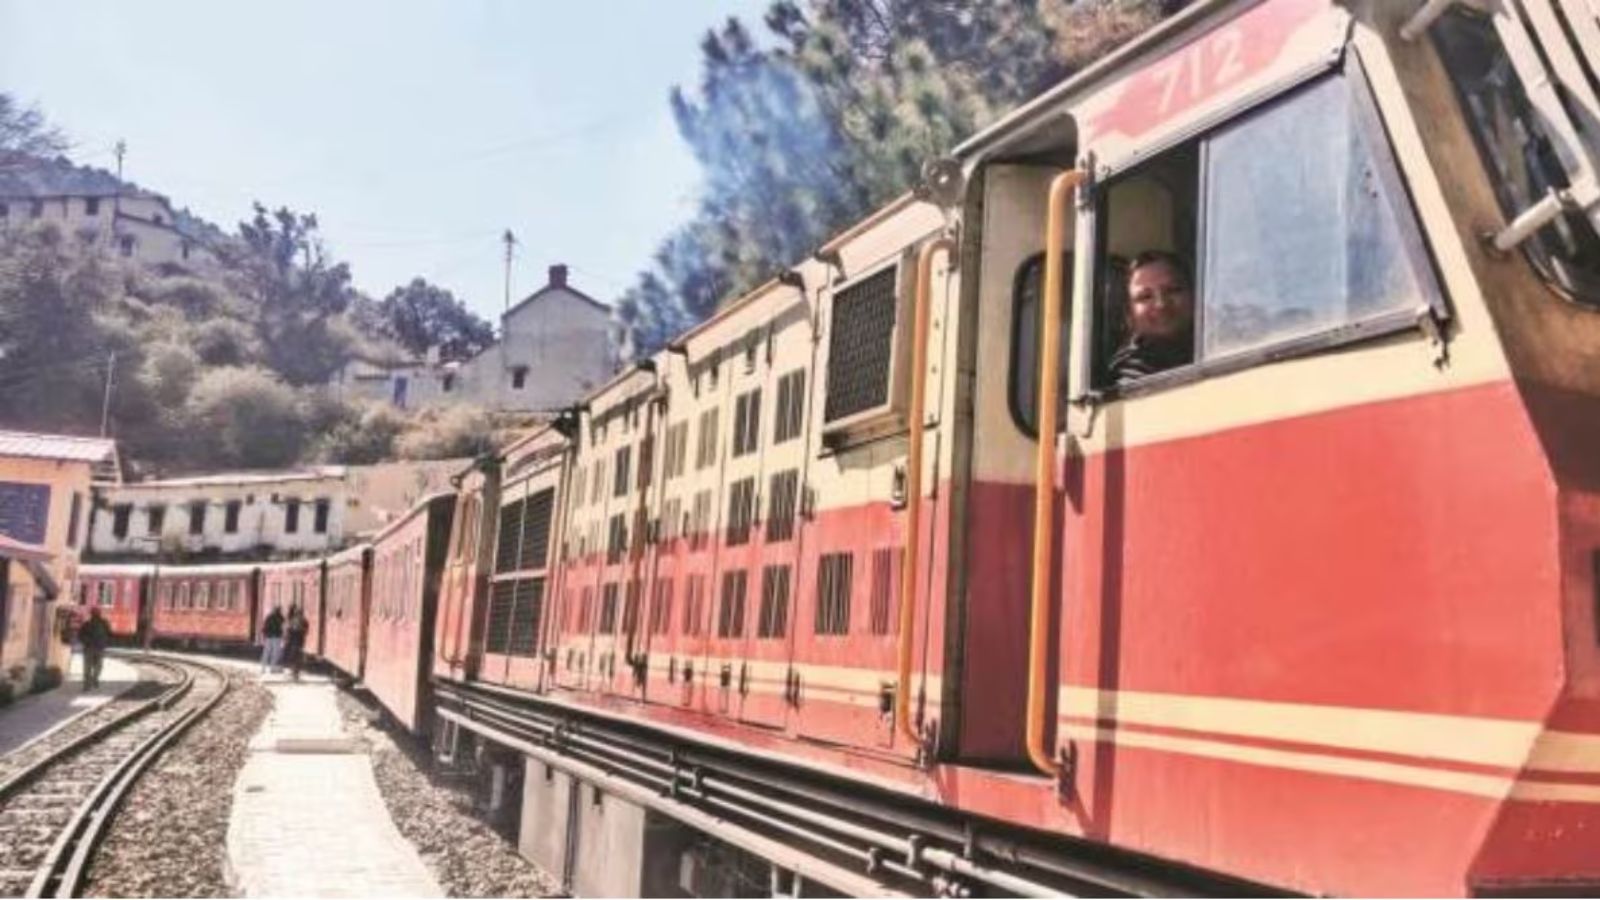 Www Kalka Xxx Videos - Kalka-Shimla toy train route does away with 10 stations to reduce travel  time | Chandigarh News - The Indian Express